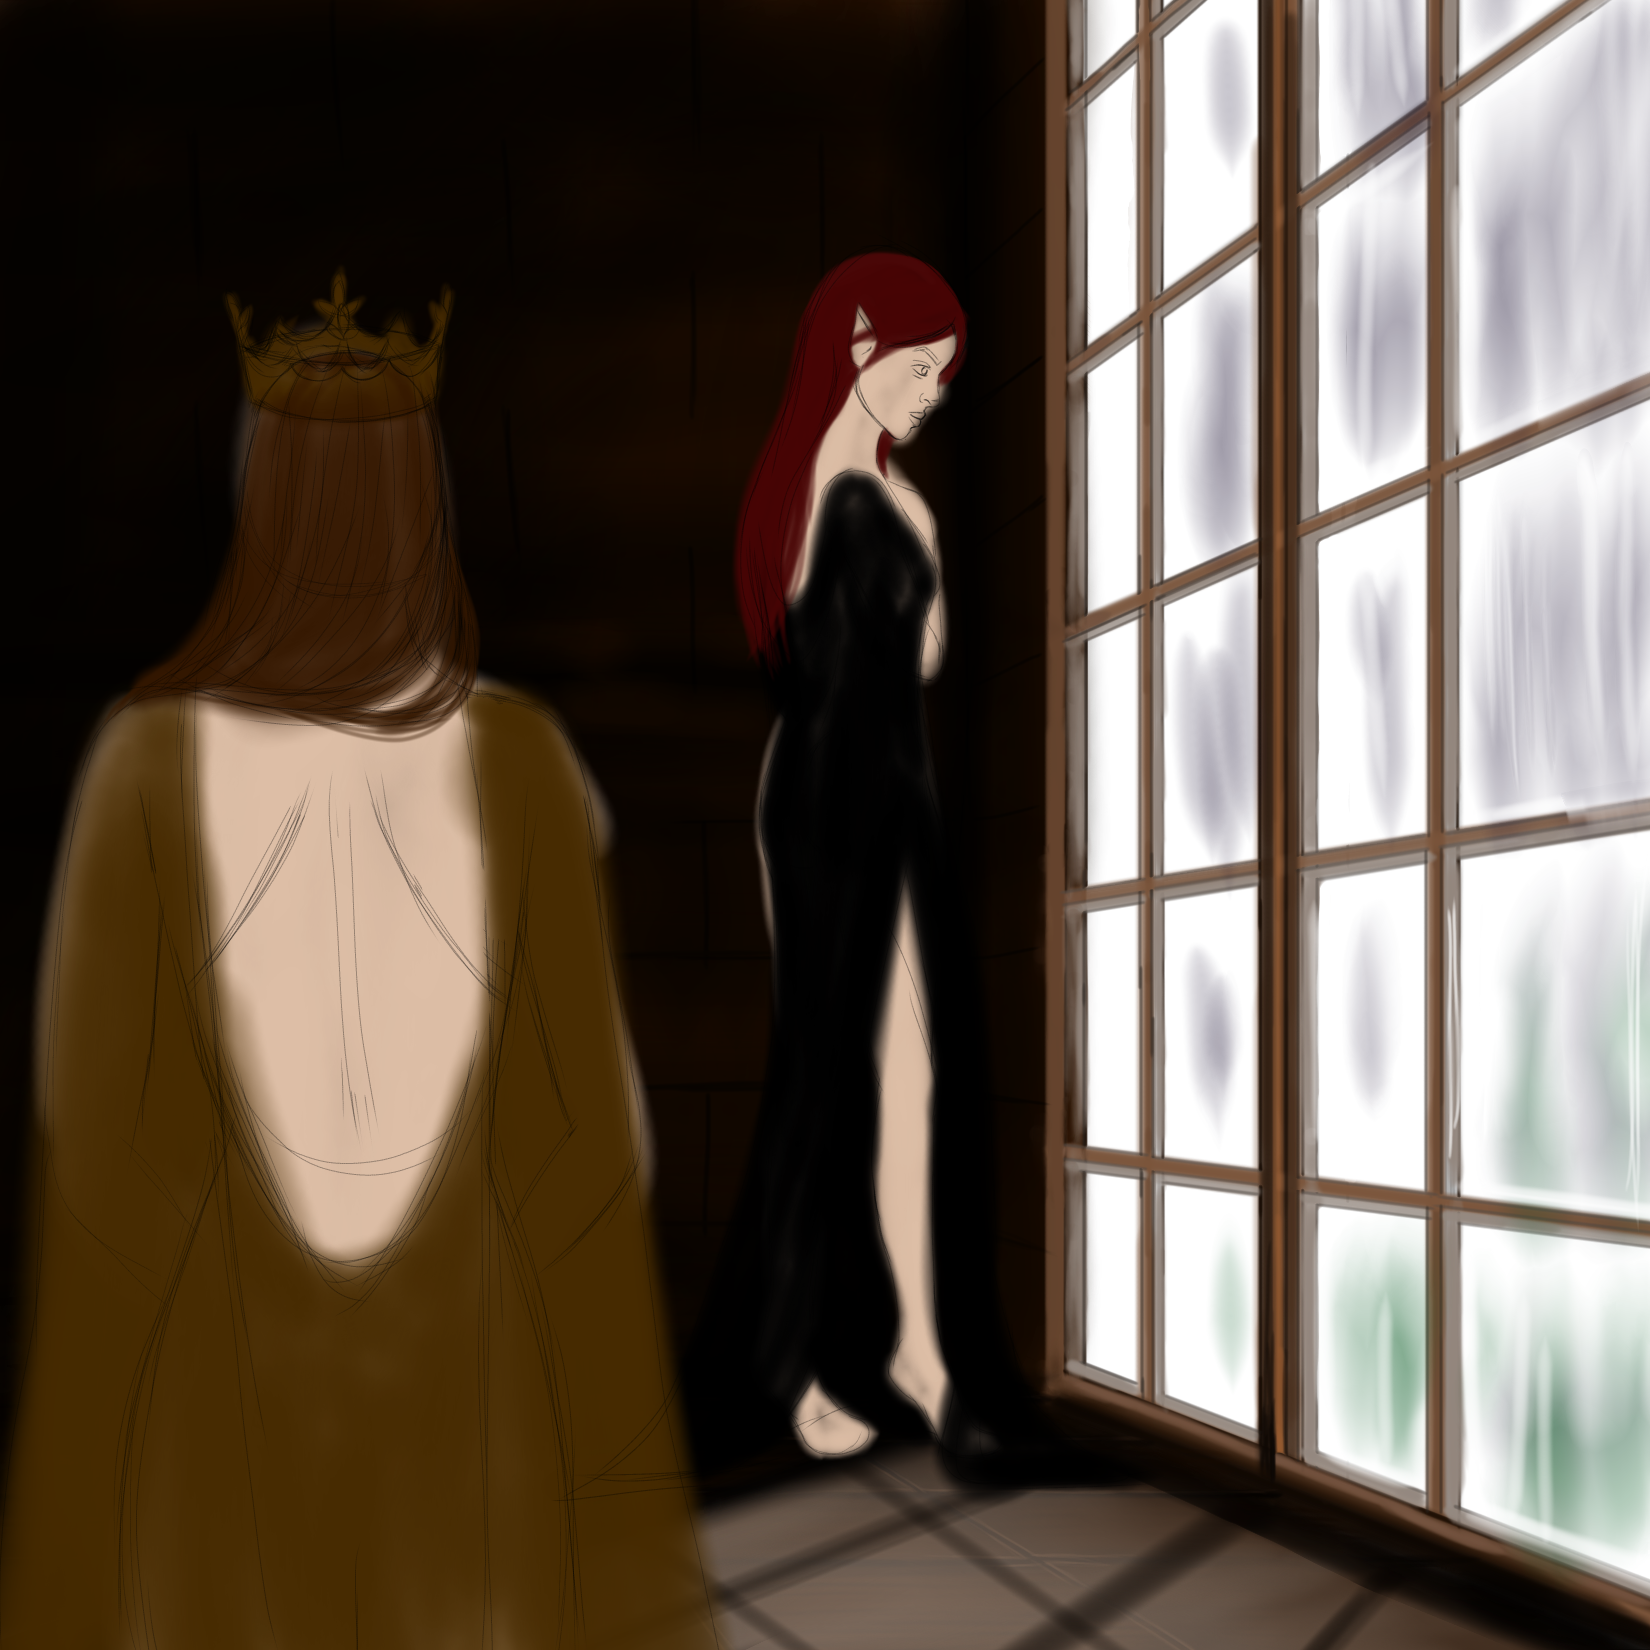 Francisftlp-Digital Drawing-The meeting with the Priestess-Step 3.png